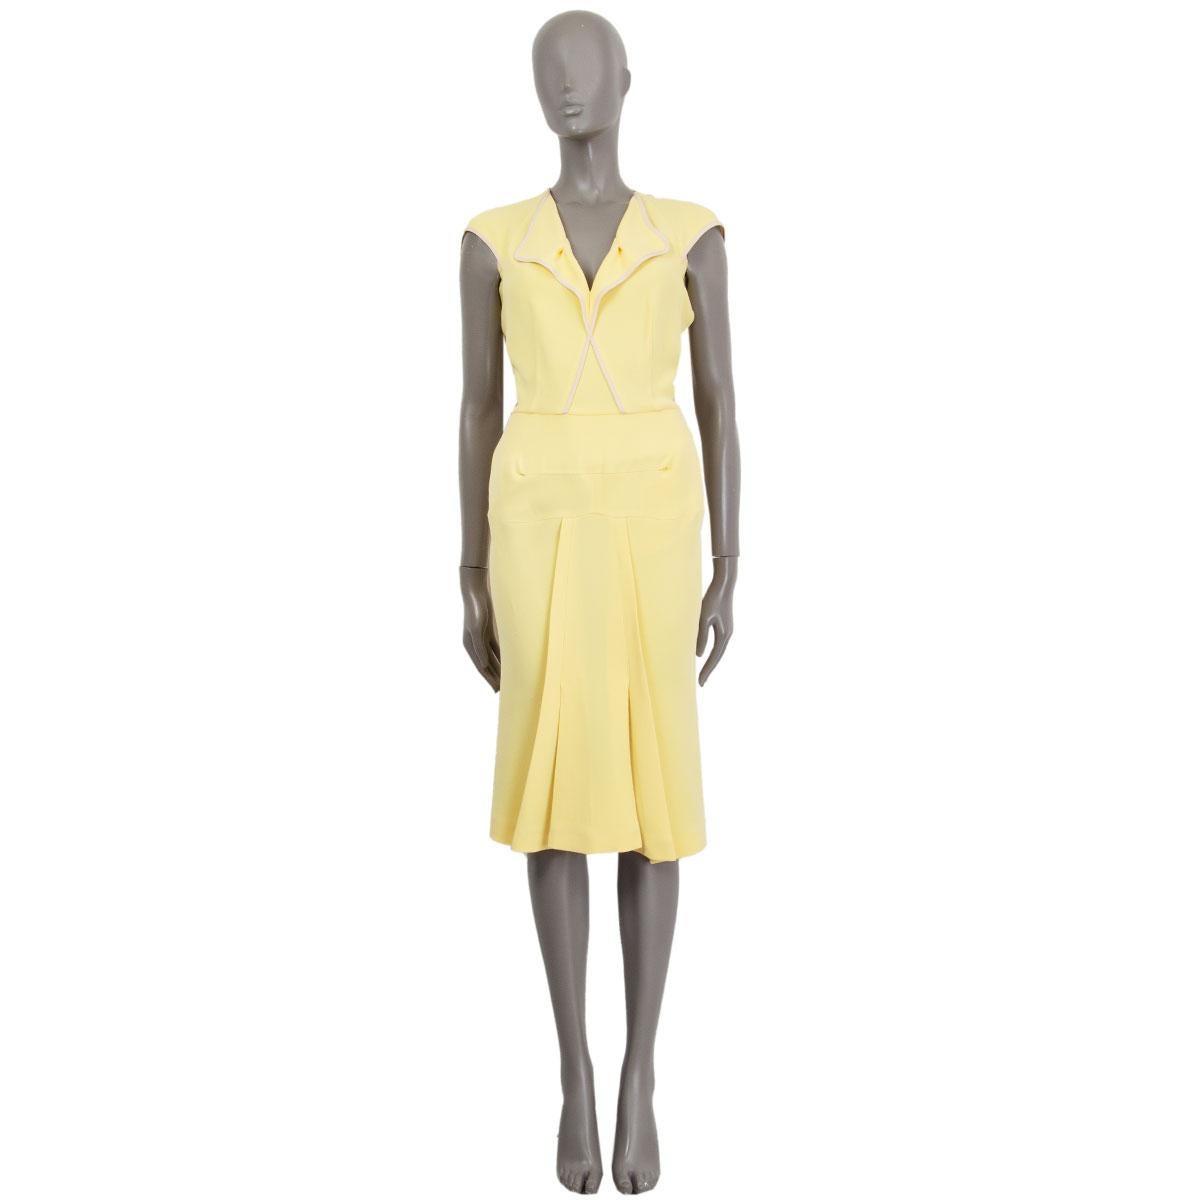 100% authentic Roland Mouret 'Montparnasse' midi dress in lemon and pale rose silk (50%) and wool (50%) with a deep v-neck and pockets. Closes in the back with a zipper. Partially lined in silk (100%). Has been worn and is in excellent condition.